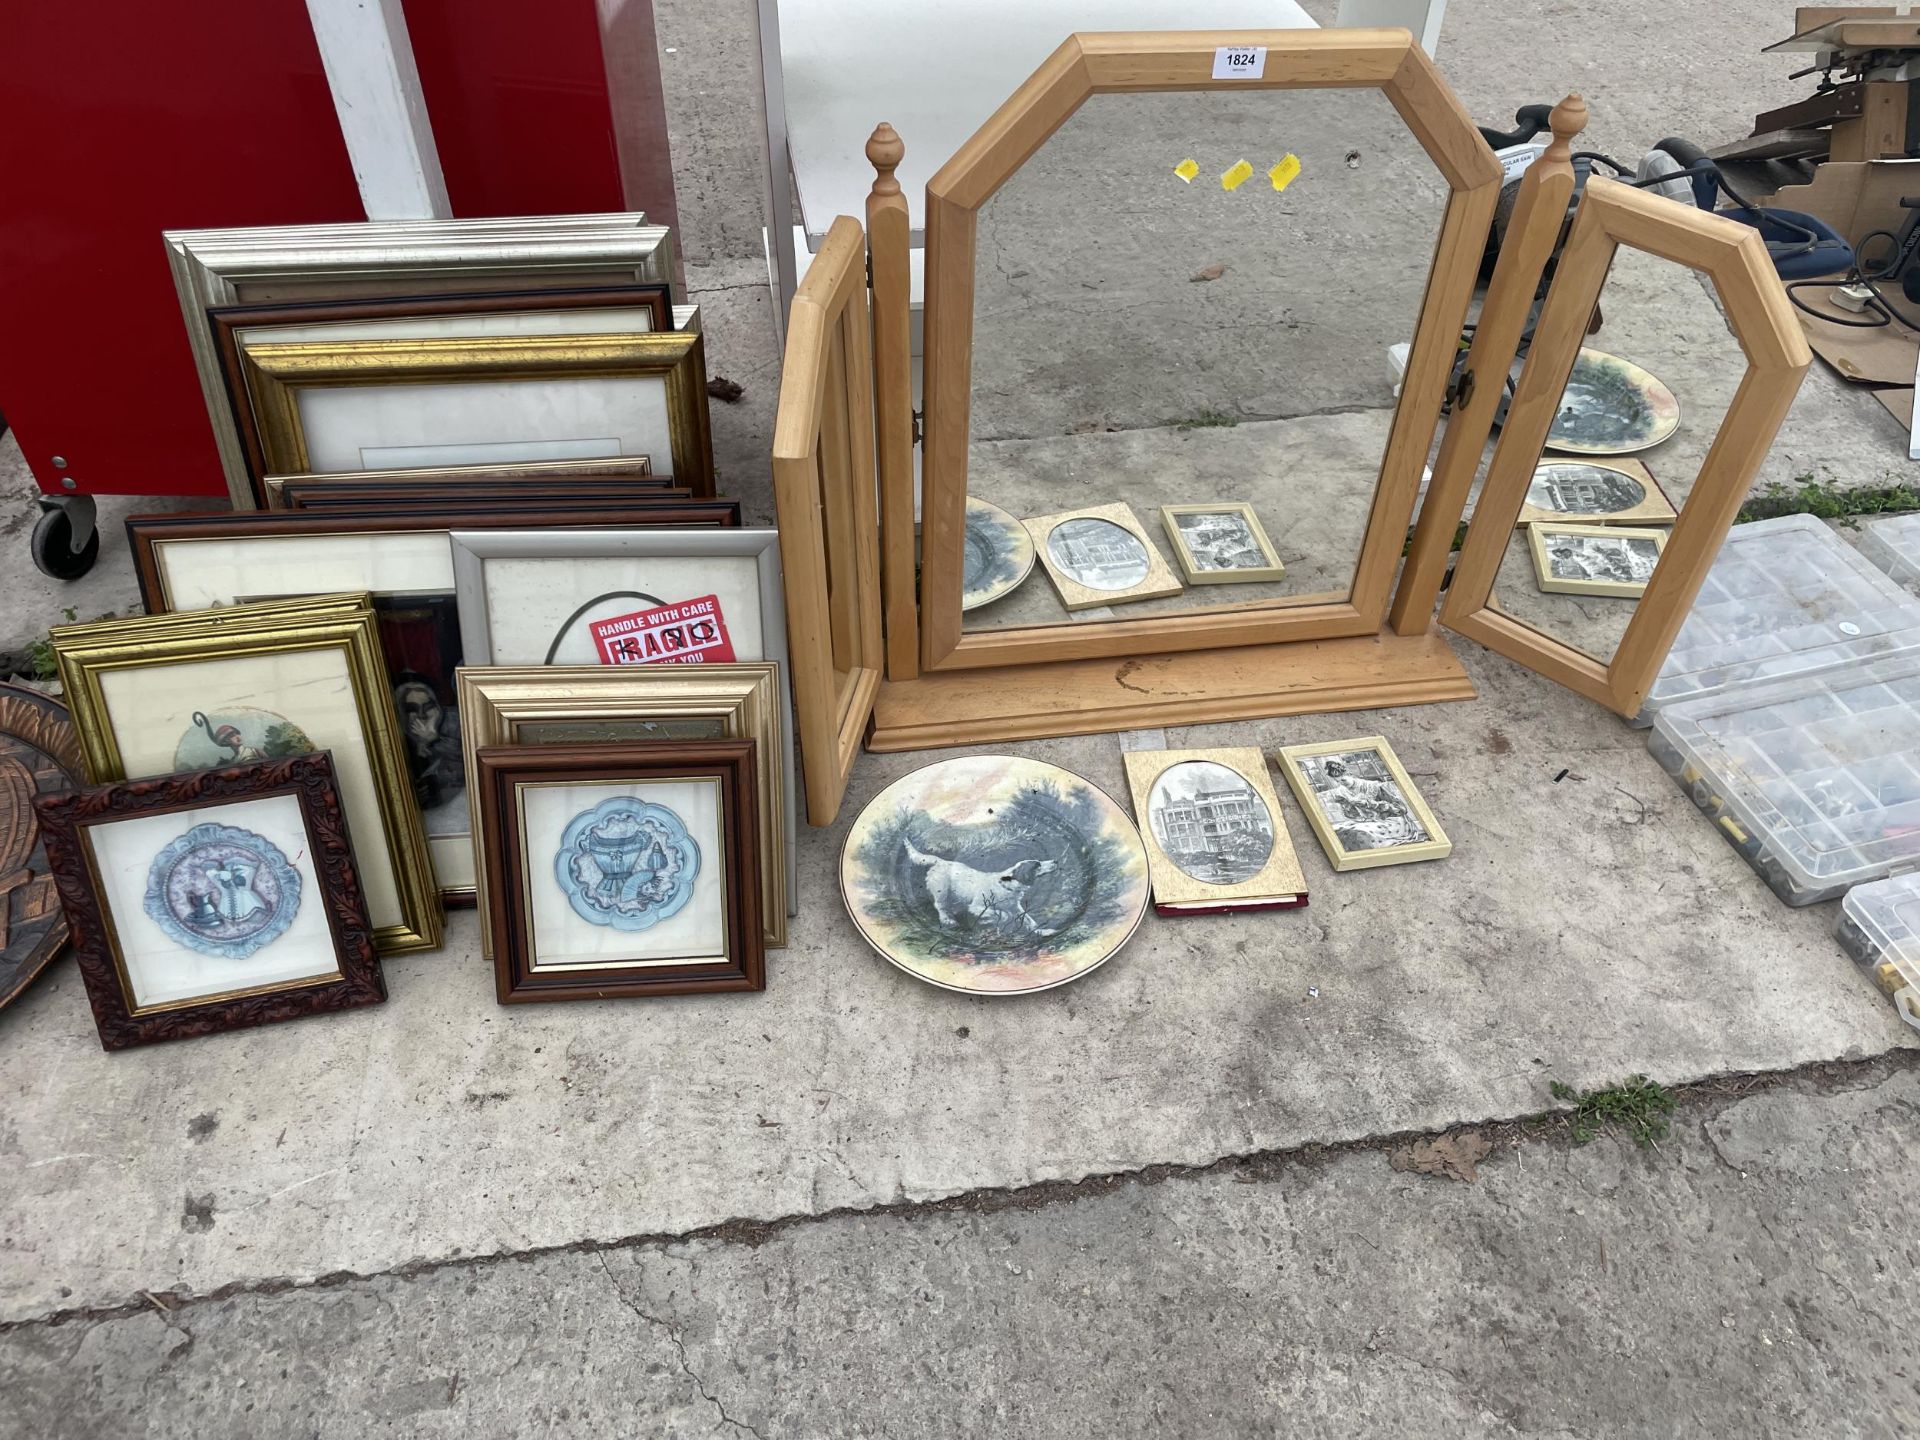 A COLLECTION OF FRAMED PRINTS TO INCLUDE A THREE SECTION DRESSING TABLE MIRROR